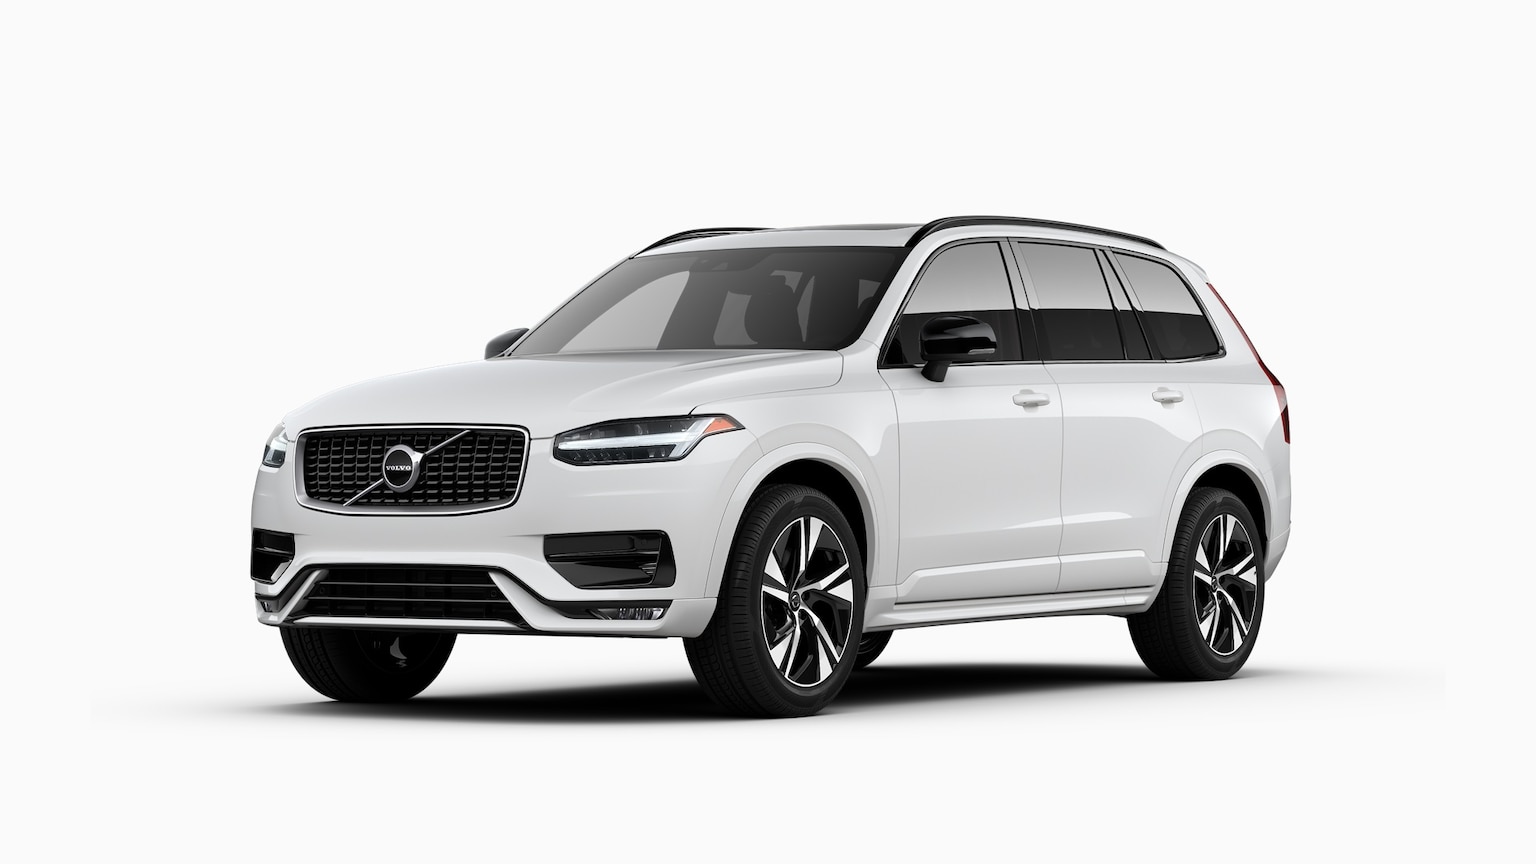 Trim Levels of the 2020 Volvo XC90 | Volvo Cars Mall of Georgia